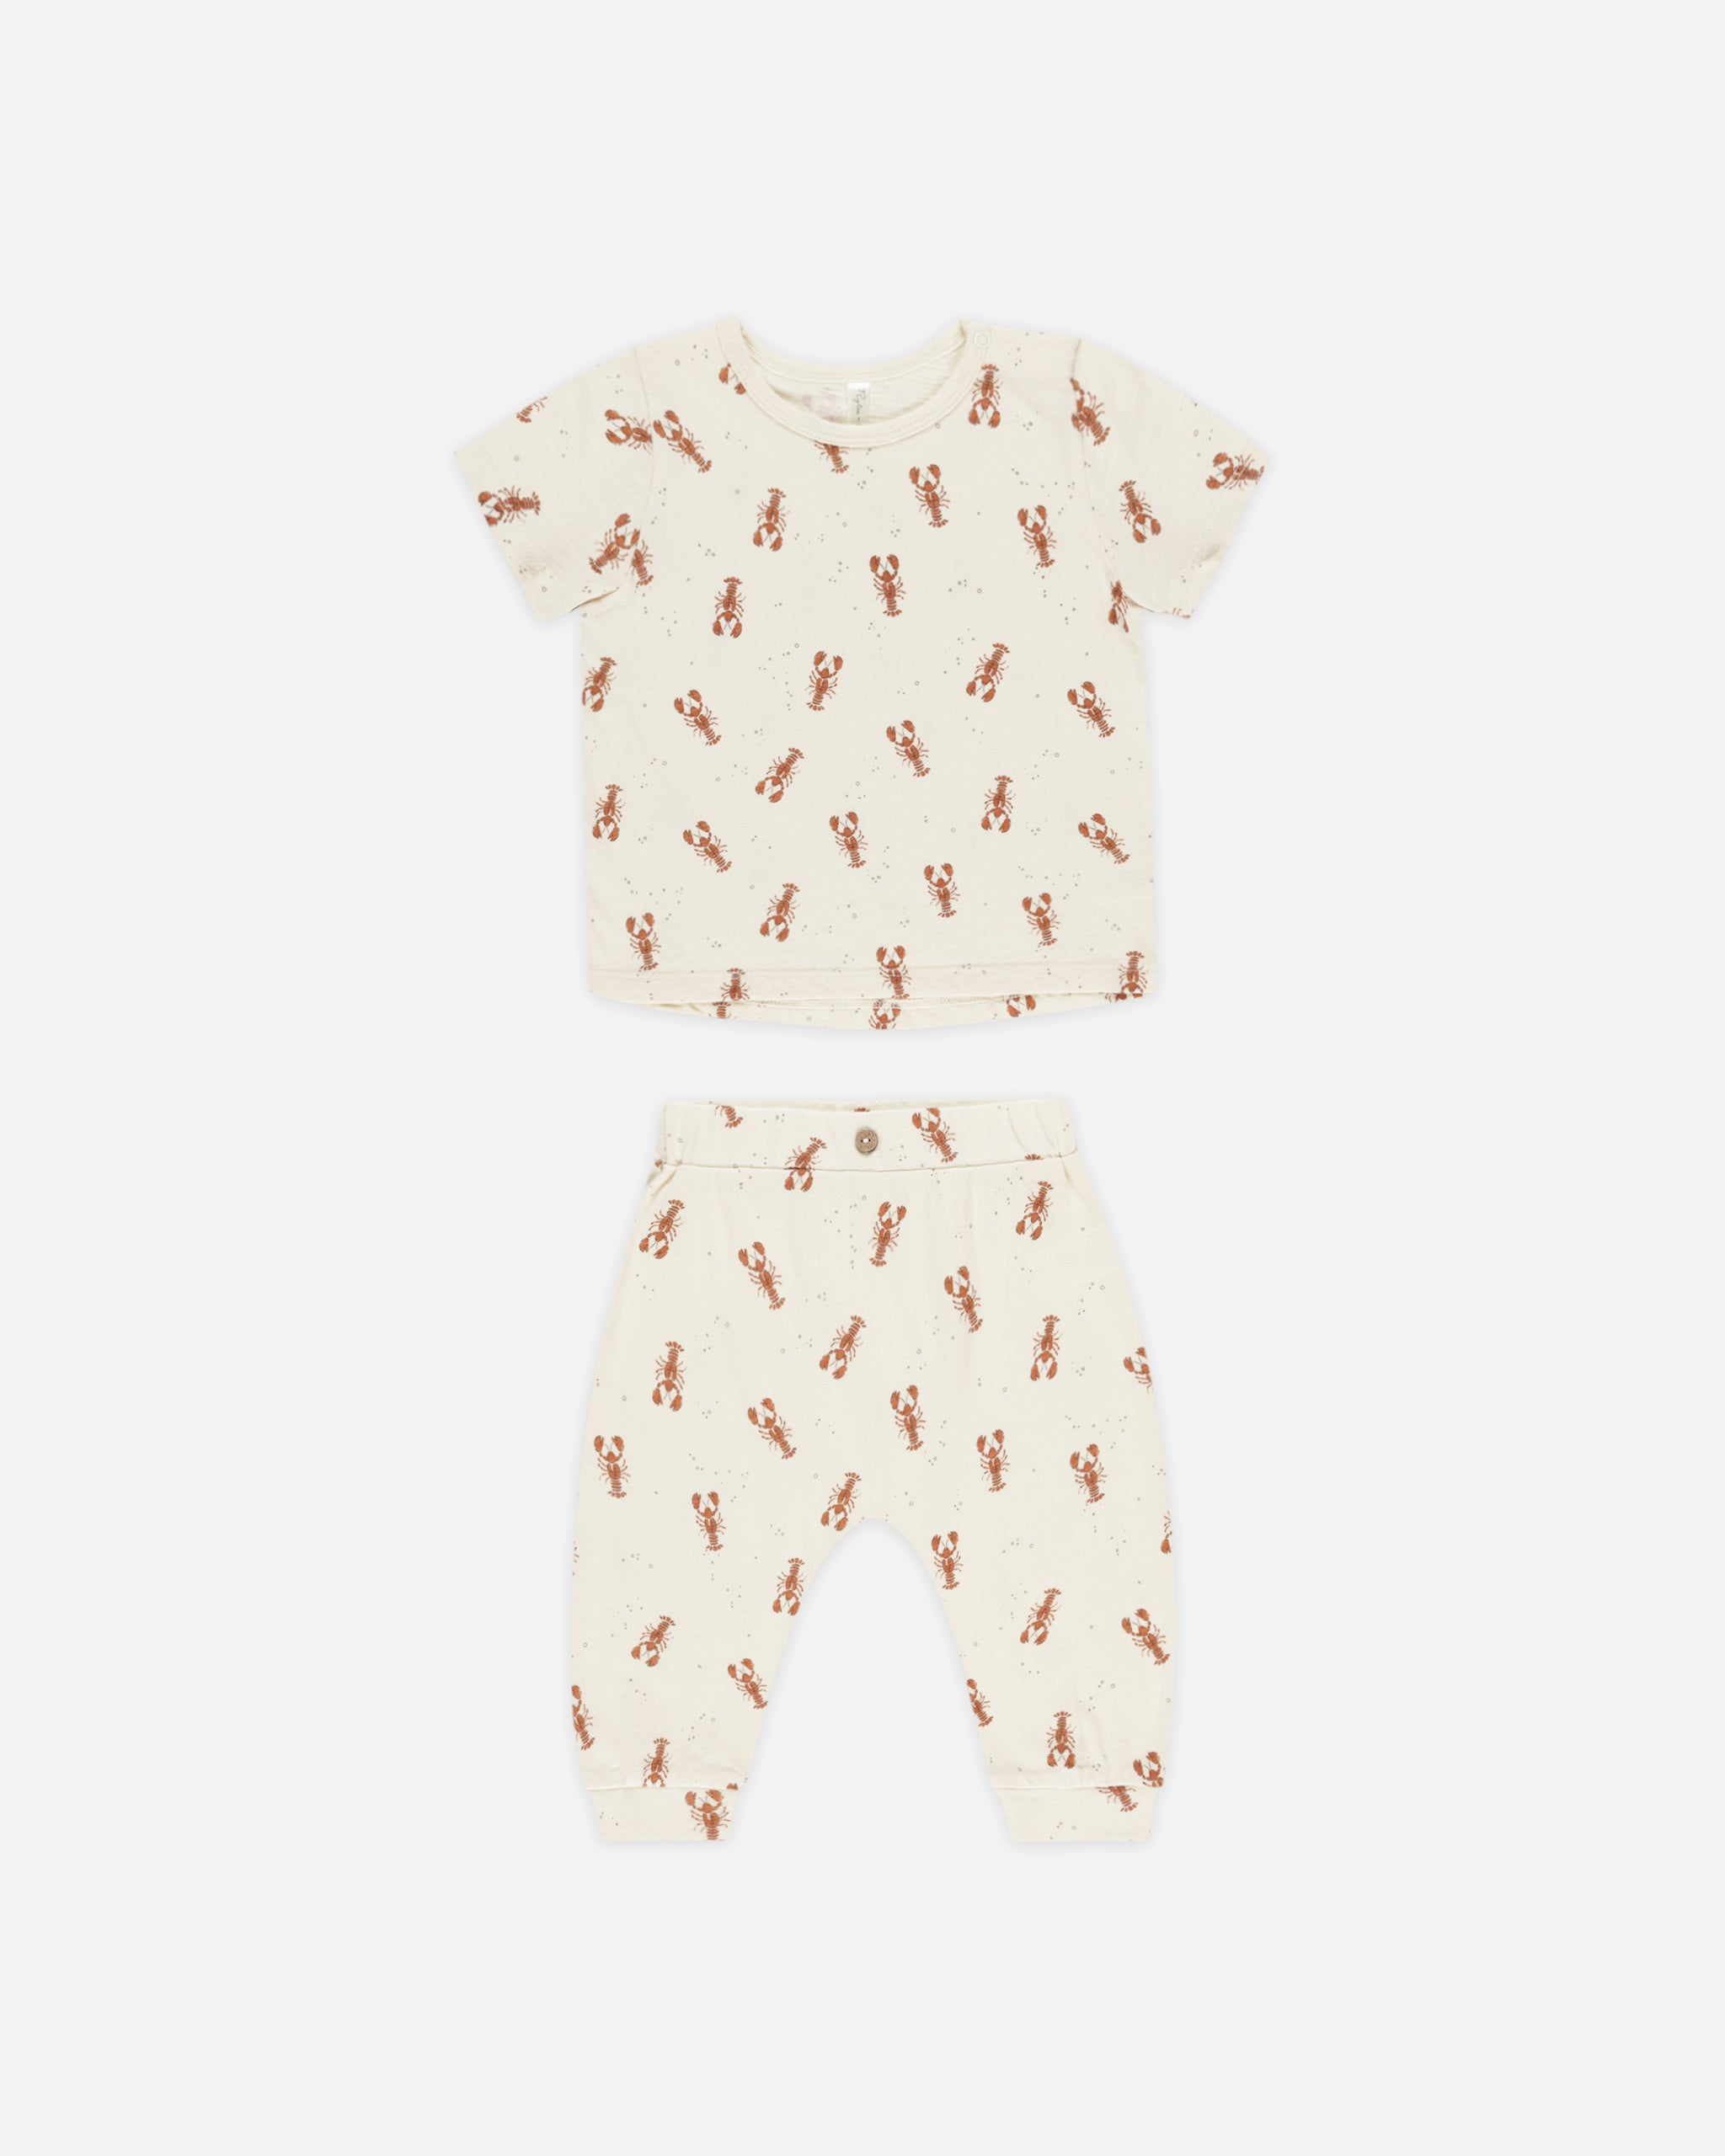 Tee + Slouch Pant Set || Lobsters - Rylee + Cru | Kids Clothes | Trendy Baby Clothes | Modern Infant Outfits |